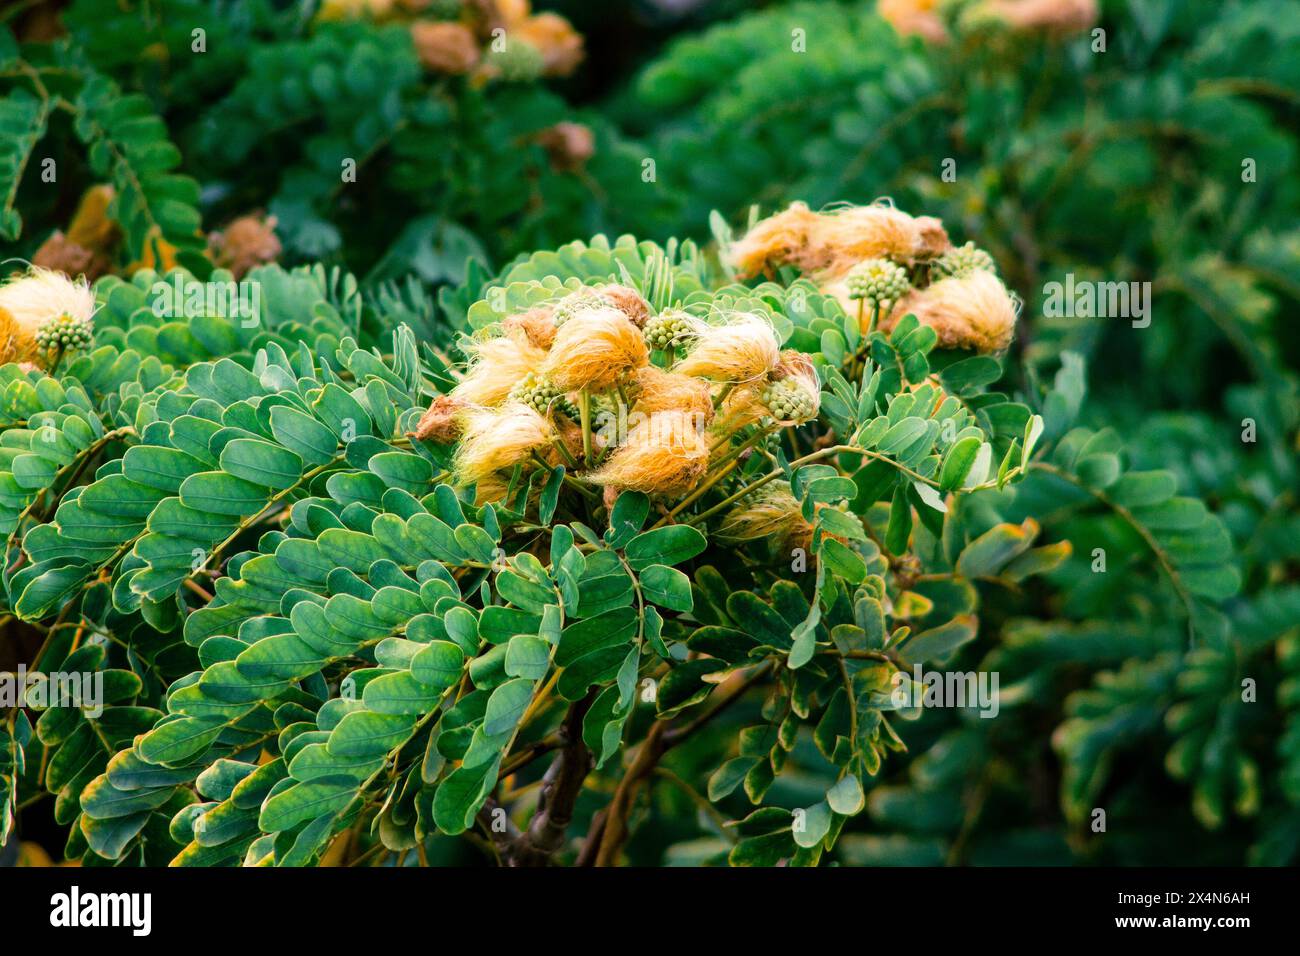 Closeup of Acacia dealbata, commonly known as the acacia tamarind, is a species of flowering plant in the family Acacia. Stock Photo